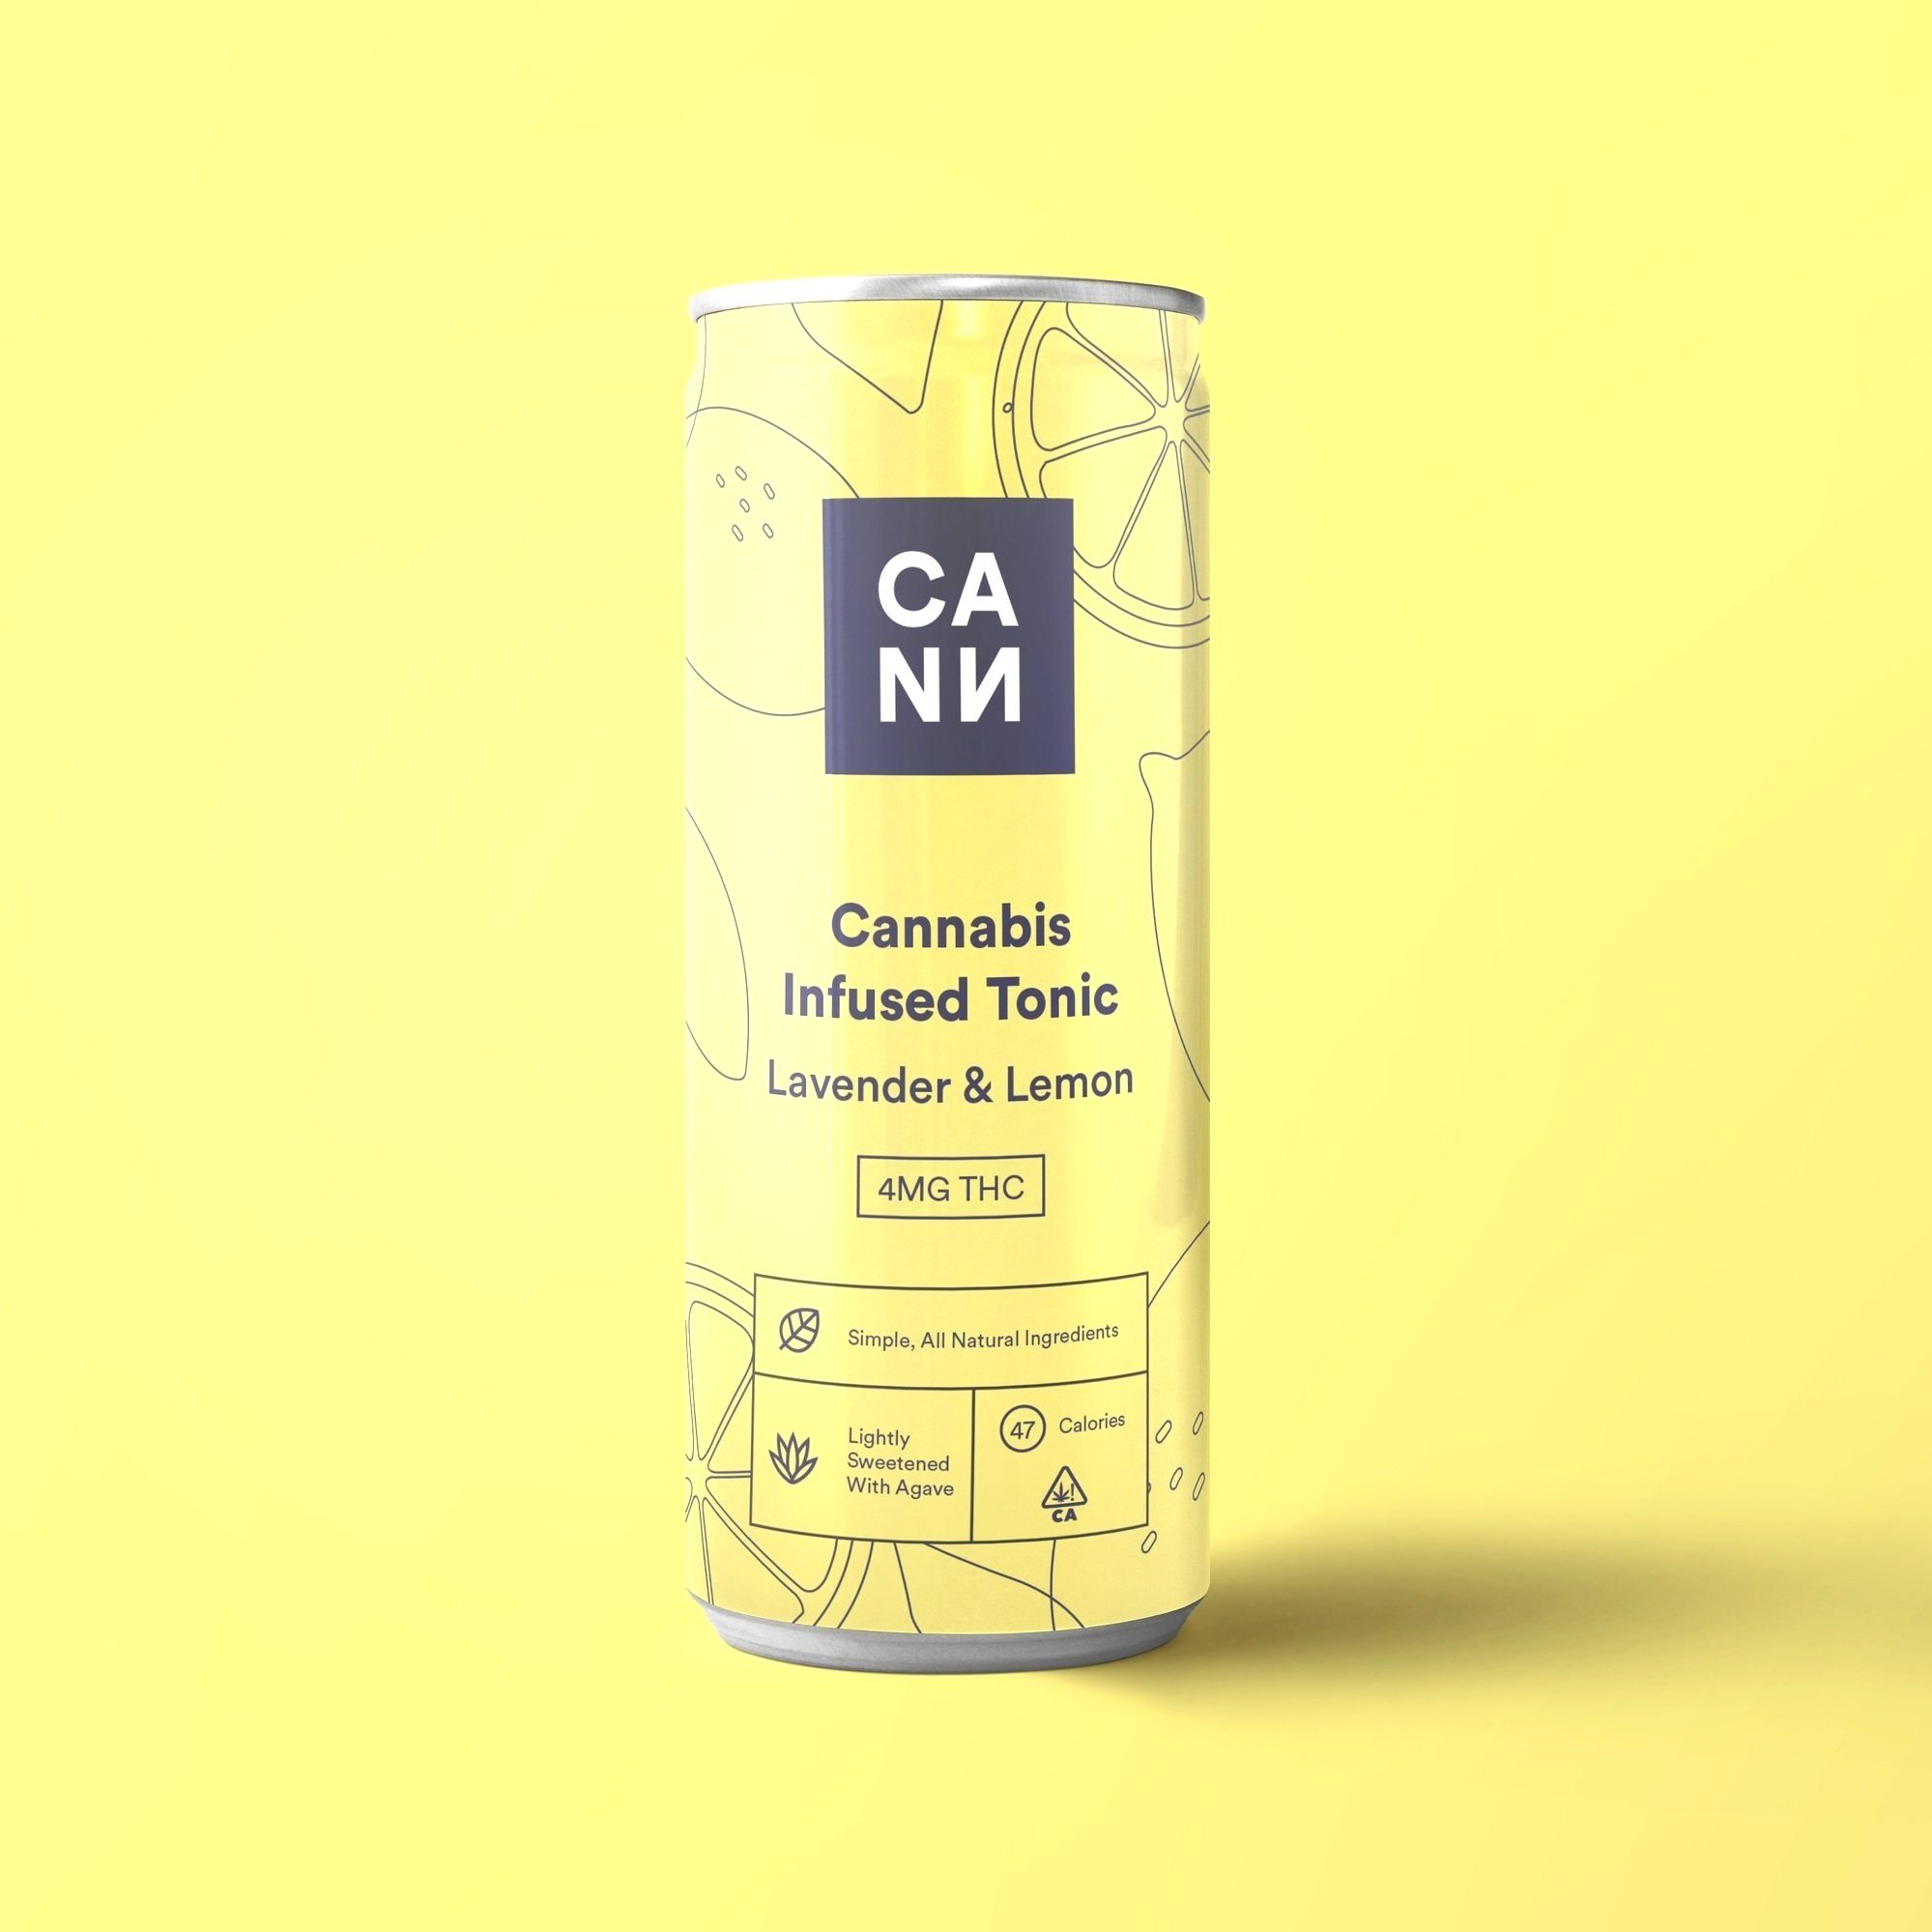 Packaging-designer-Cannabis drink packaging design for Cann. A cannabis drinks brand based in the USA